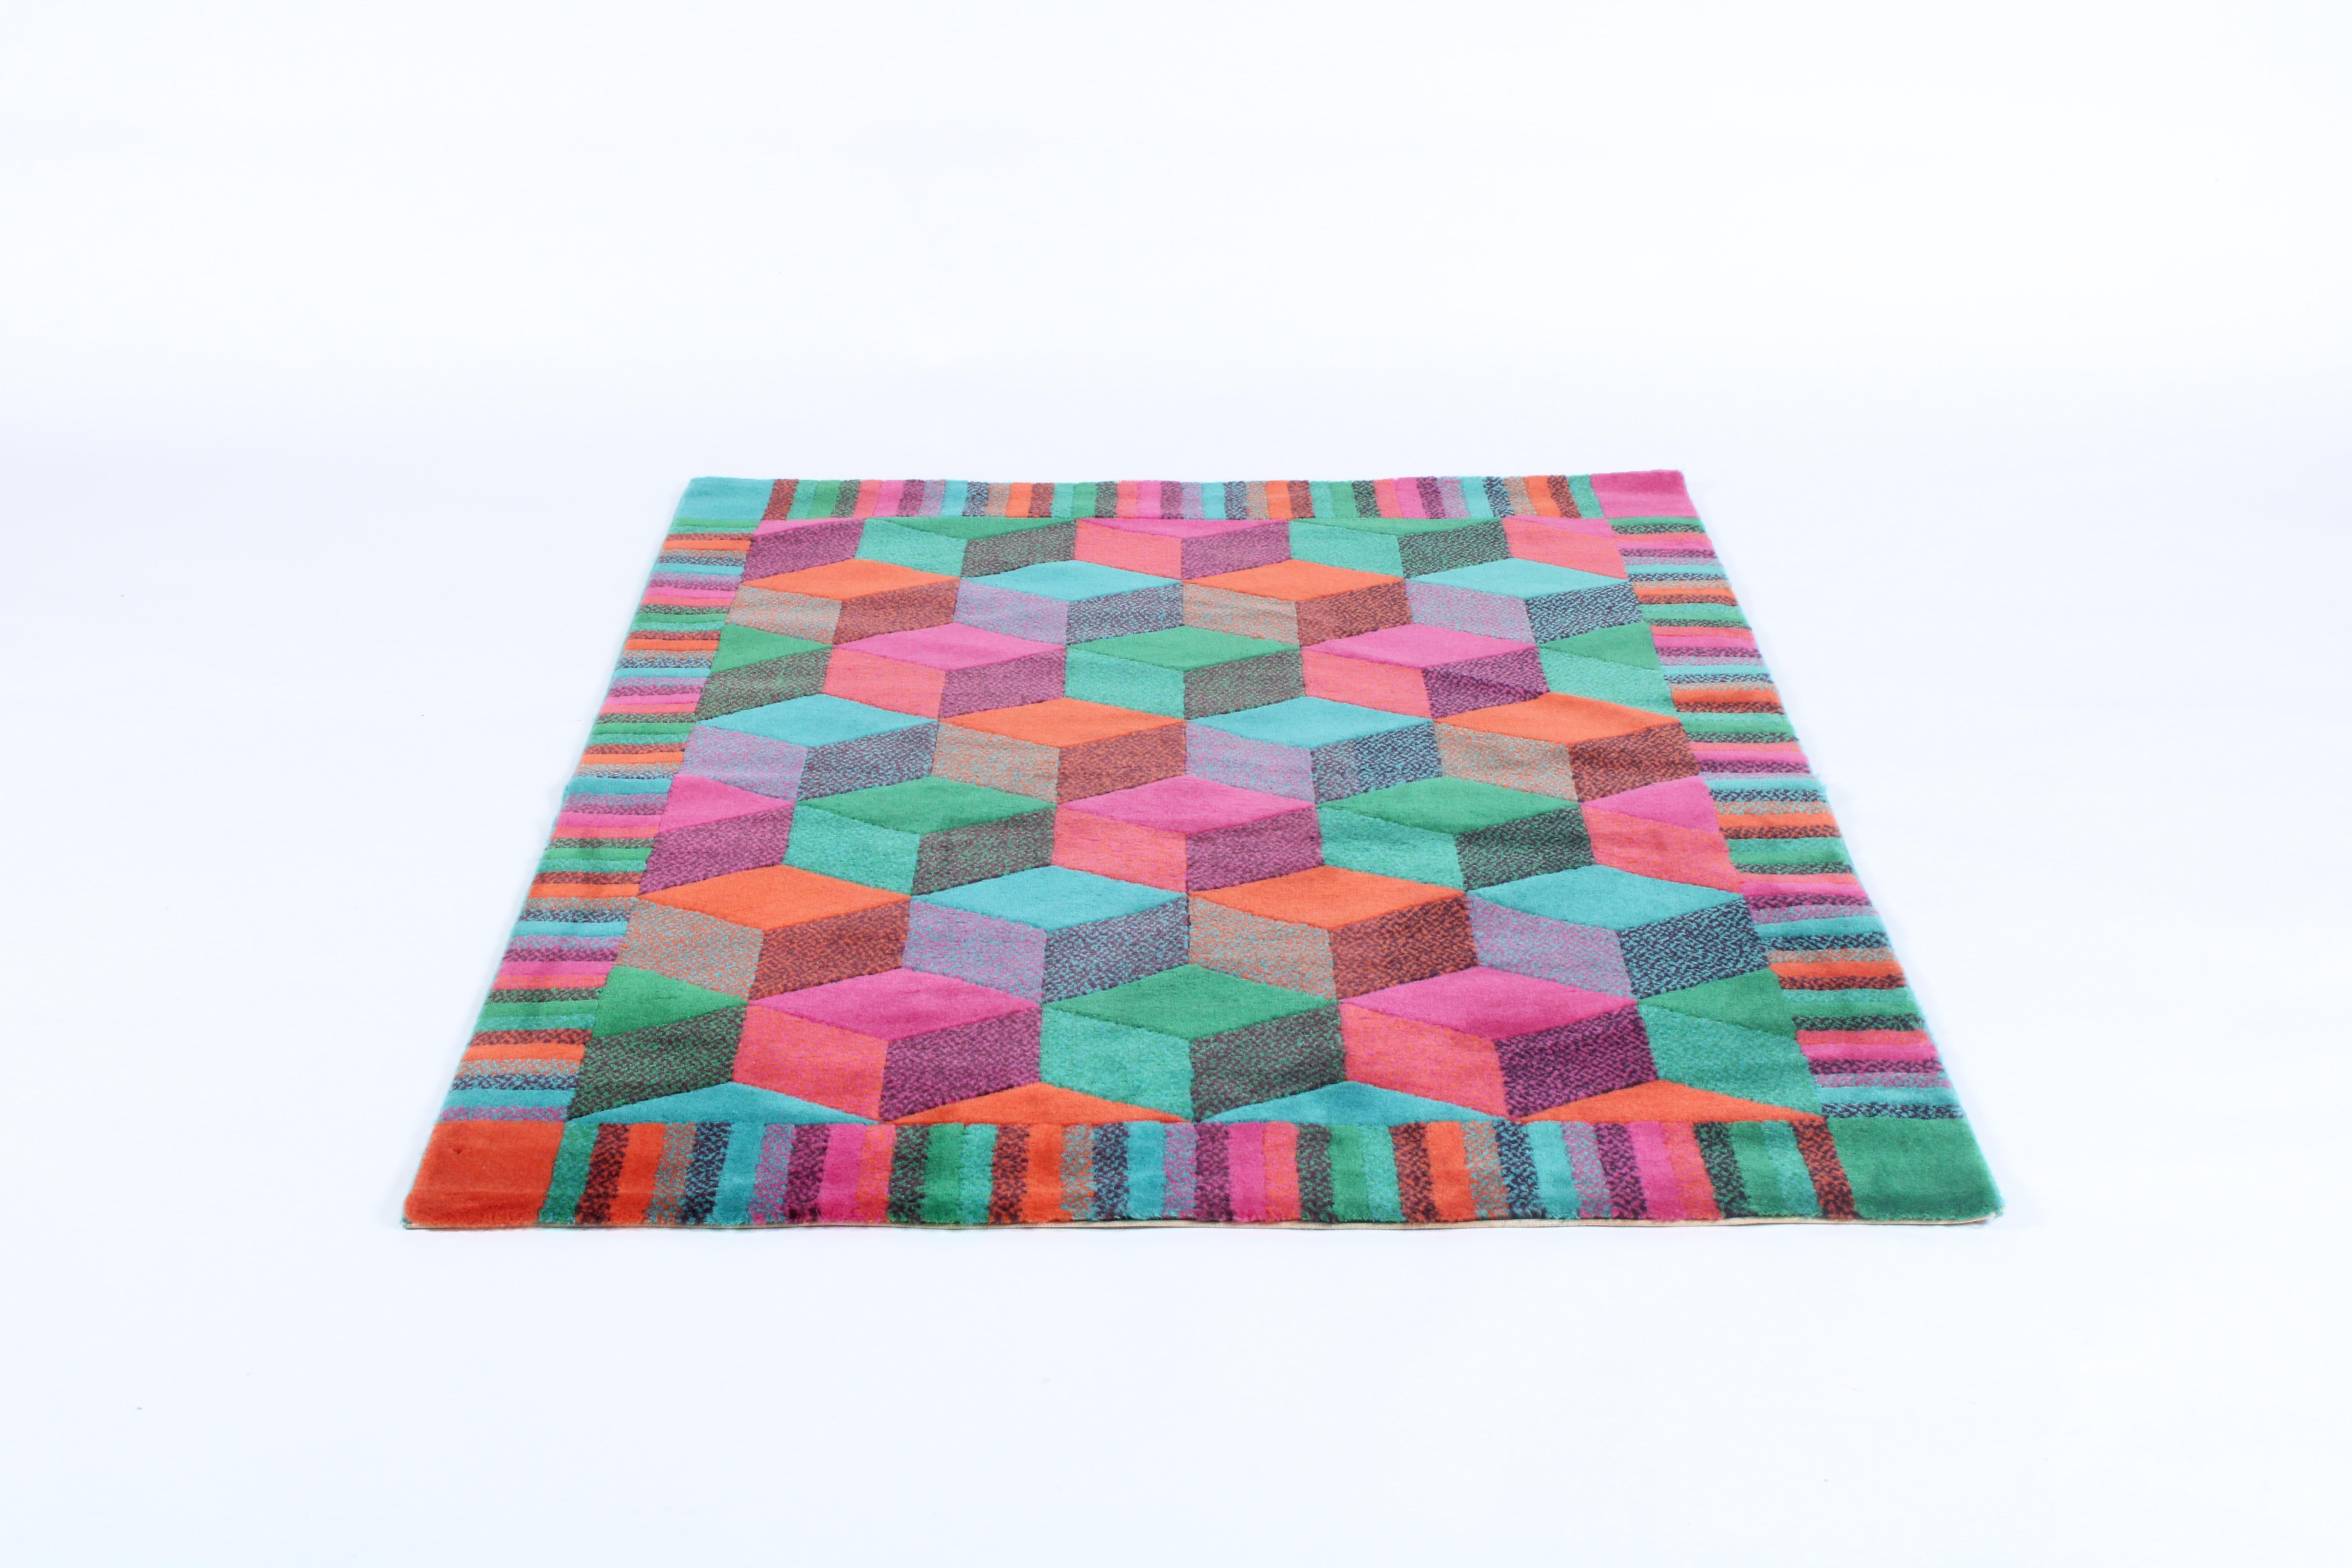 Stunning geometric patterned vintage Missoni wool rug by T & J Vestor.
Bearing the original Missoni labels to the side and underneath. An exquisite rug presented in superb vintage condition.
Origin Italy circa 1980
235 x 130 cm